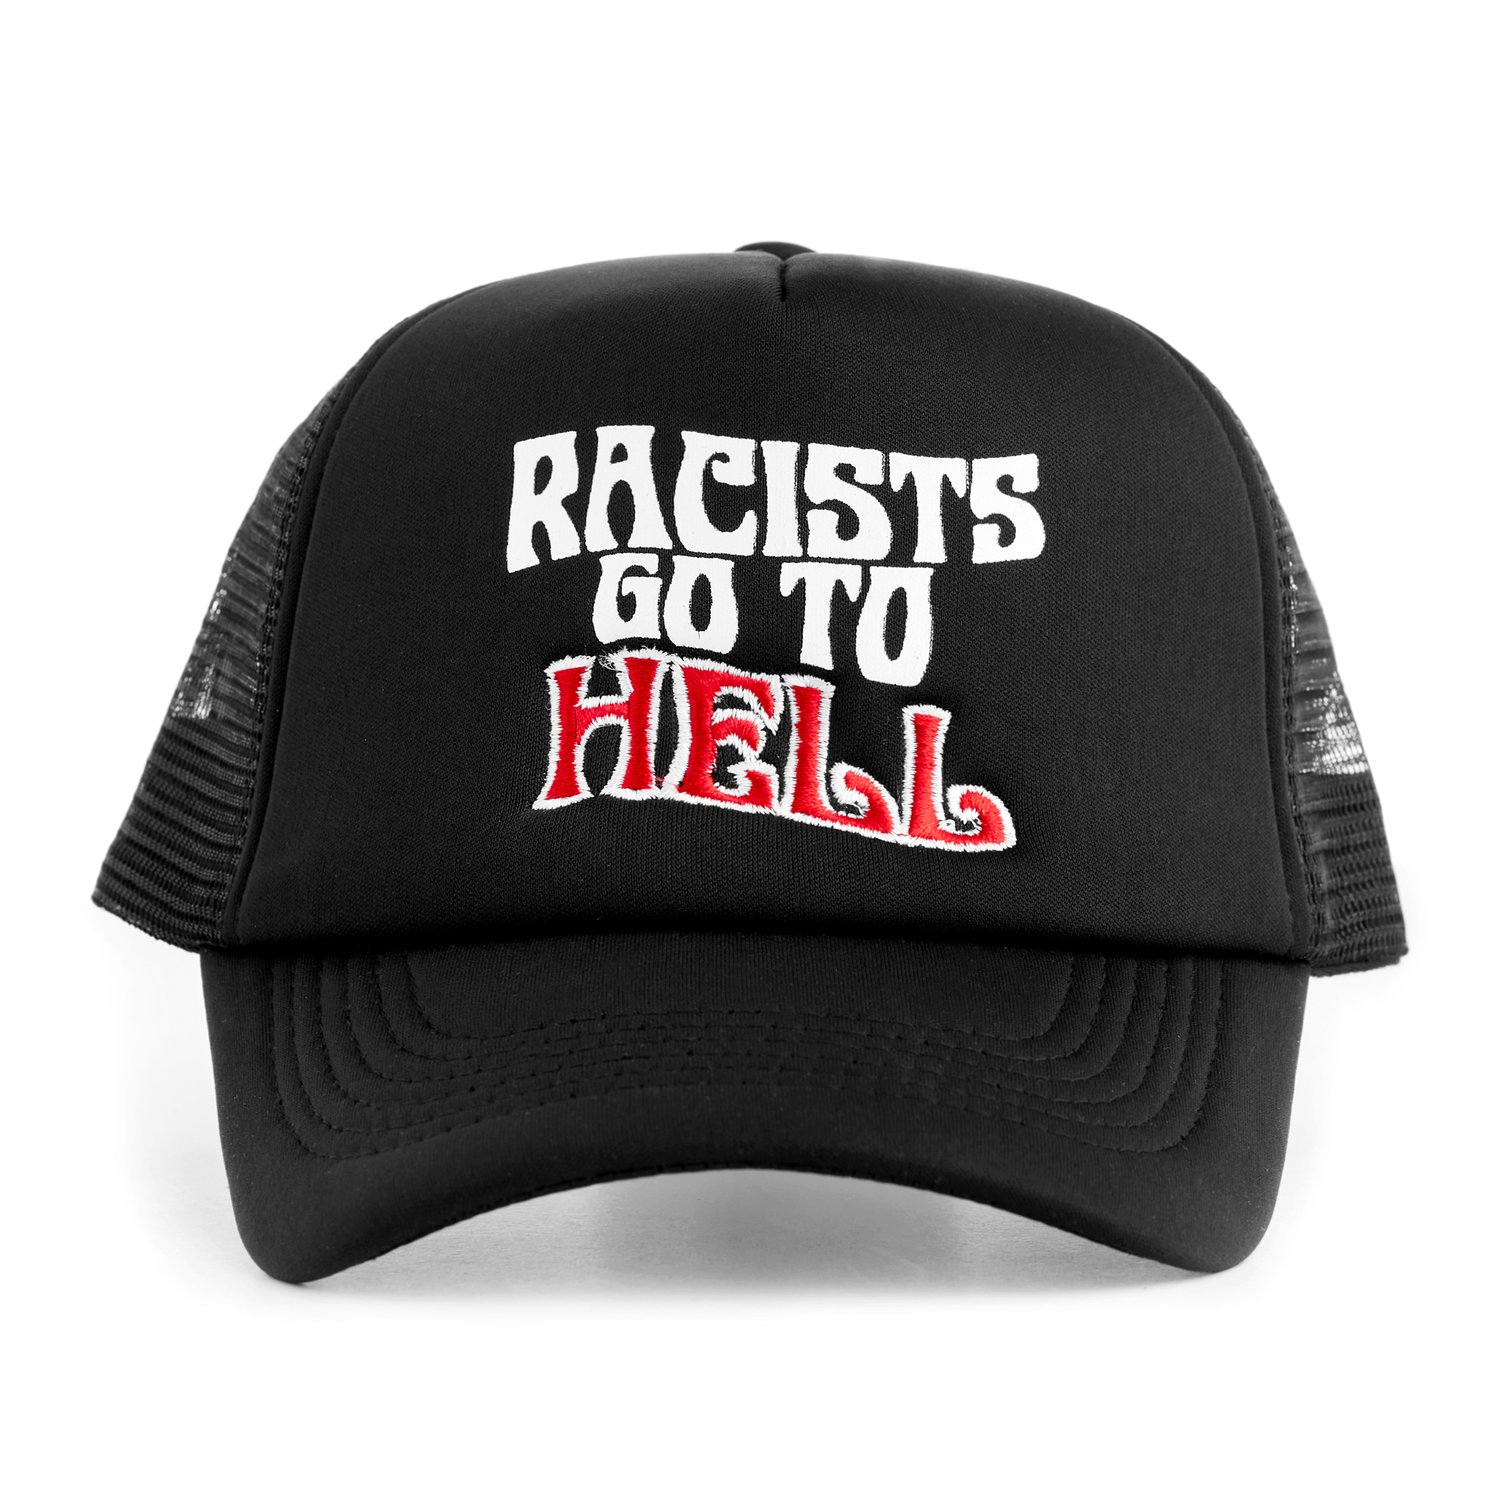 Image of Racists Go To Hell Trucker (Black/Blk)